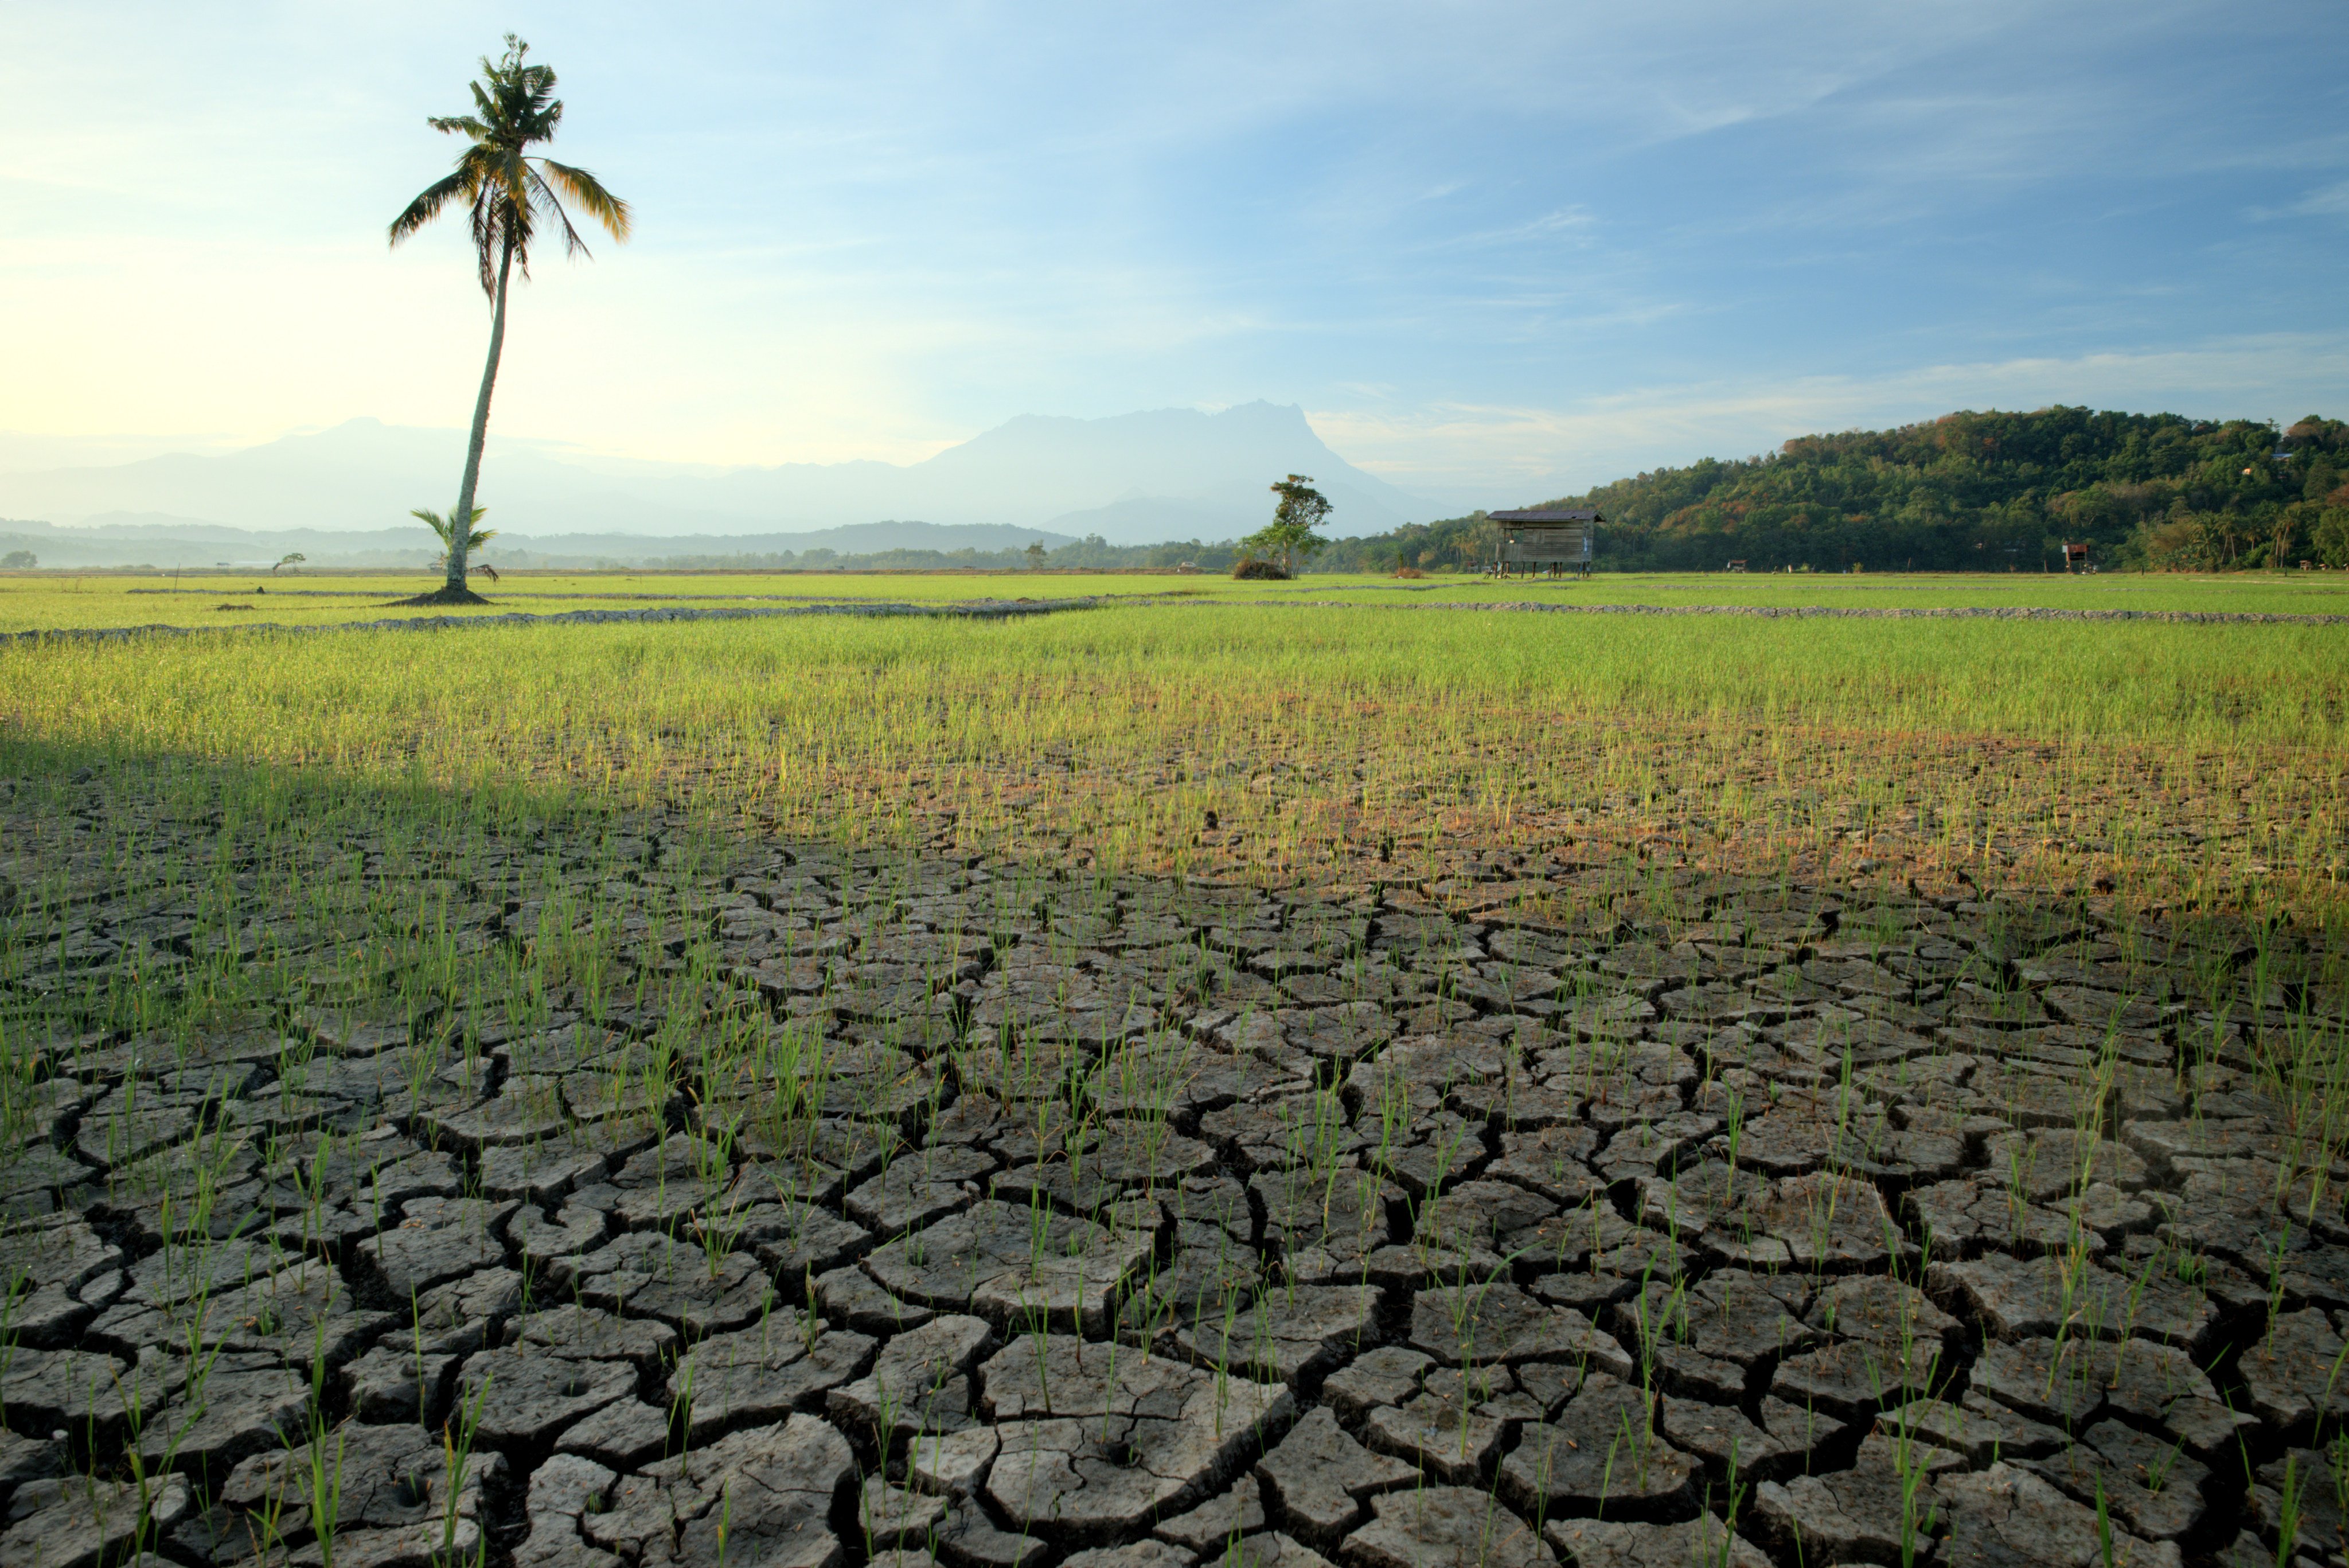 Cracked soil is seen in a dried-out paddy field in Malaysia’s Sabah state. A drought in the state, driven by El Nino conditions that bring prolonged hot and dry weather, has been made worse by old, failing water infrastructure. Photo: Shutterstock